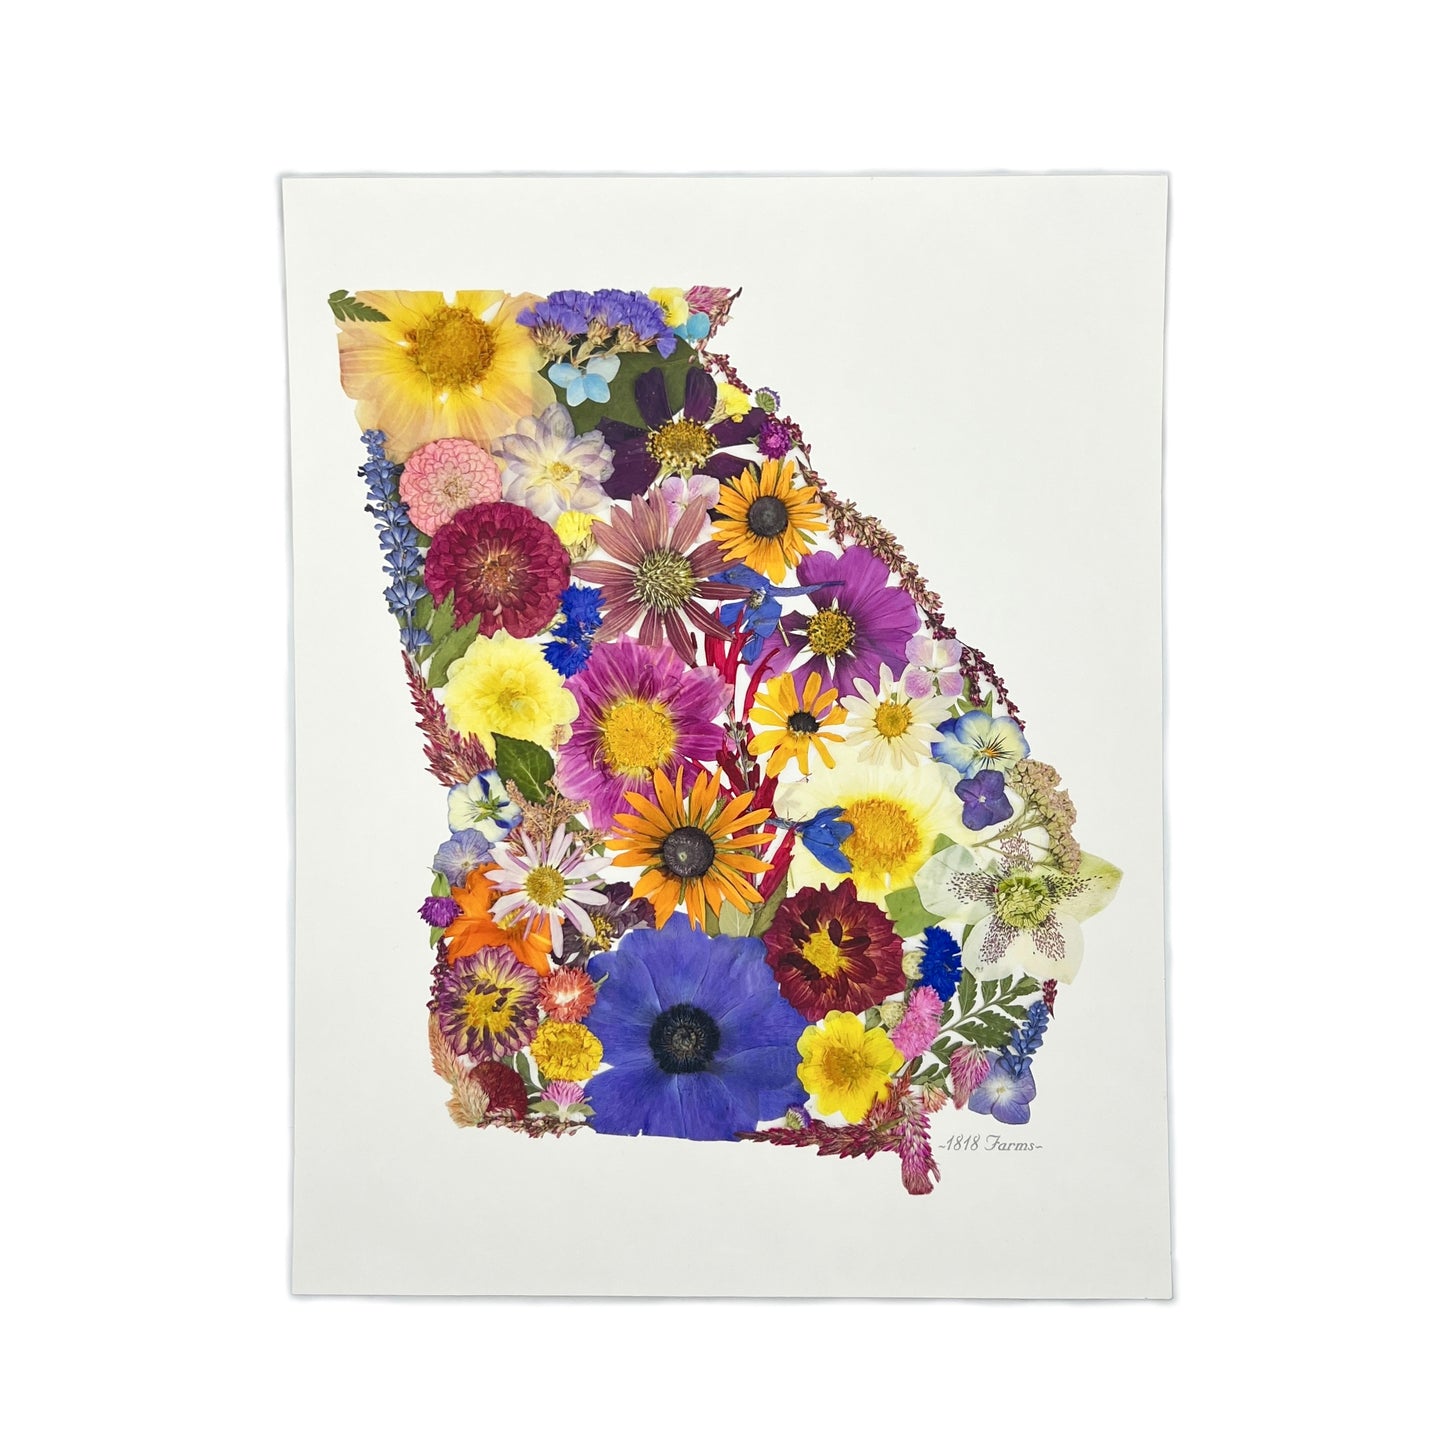 Georgia Themed Giclée Print Featuring Dried, Pressed Flowers - "Where I Bloom" Collection Giclee Art Print 1818 Farms   